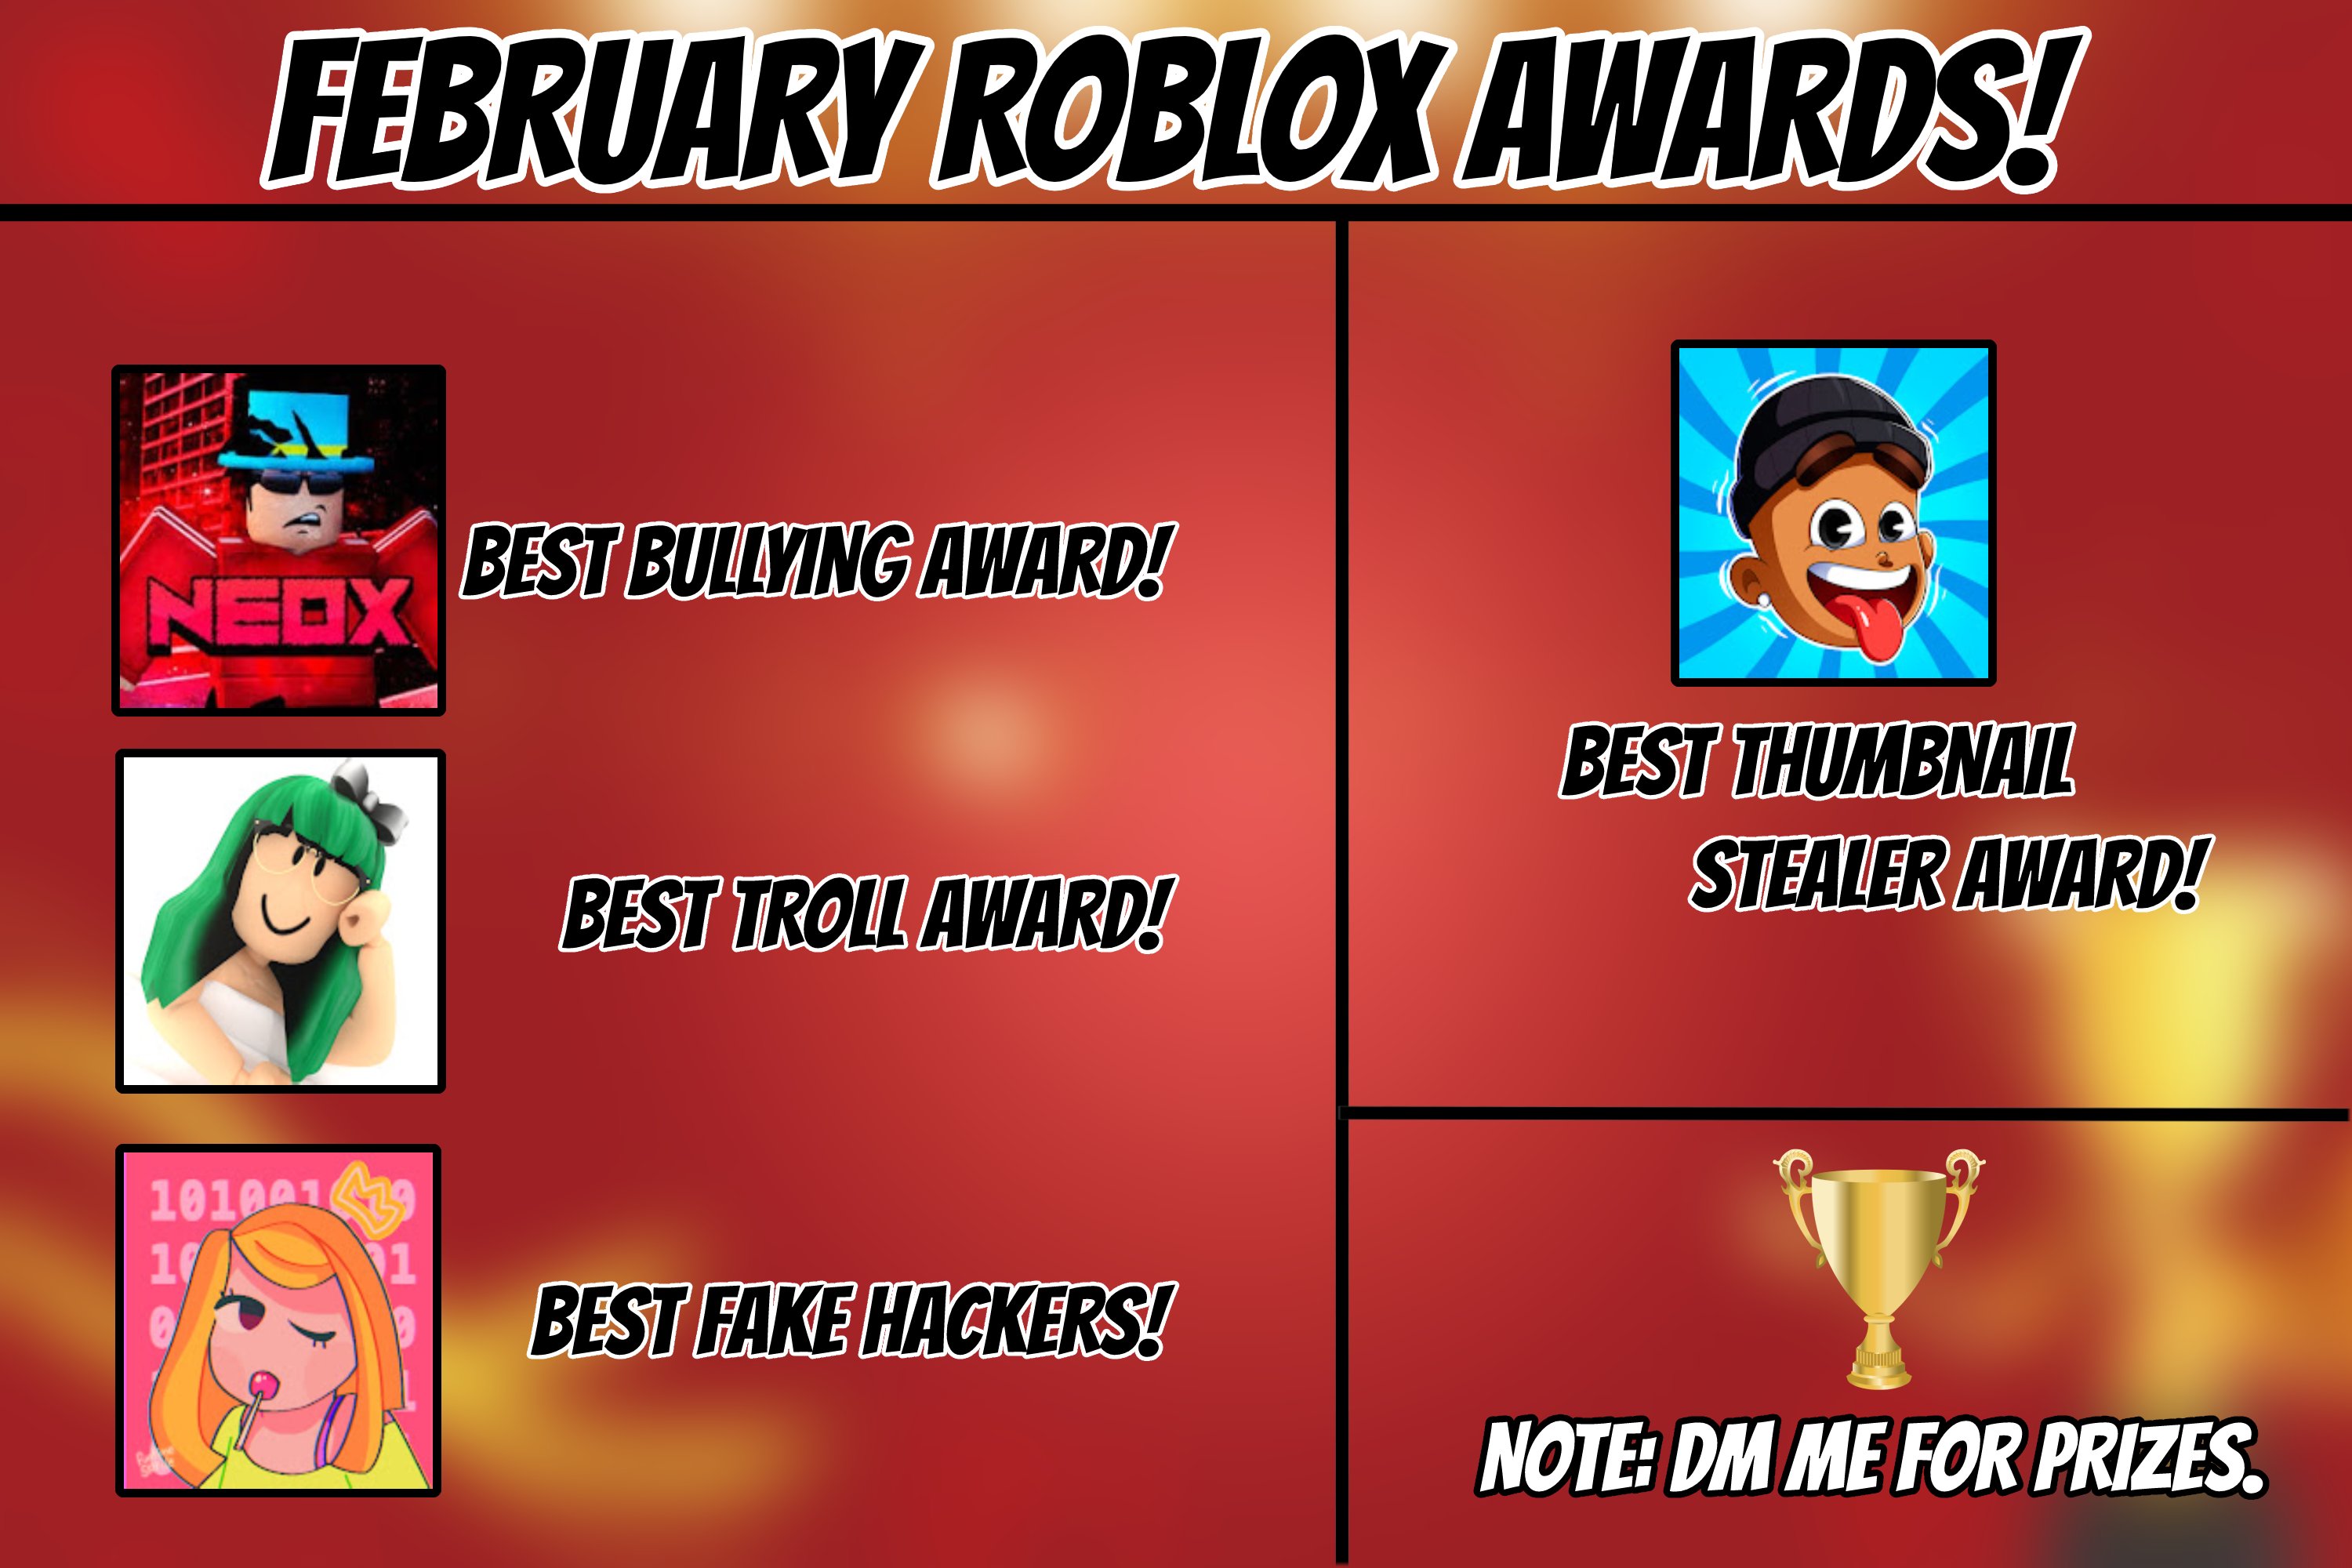 Roblox Letters On Twitter From Yt Kretin To Everyone Message February Roblox Awards Https T Co Hml4uetd9a Twitter - best roblox best troll hacks